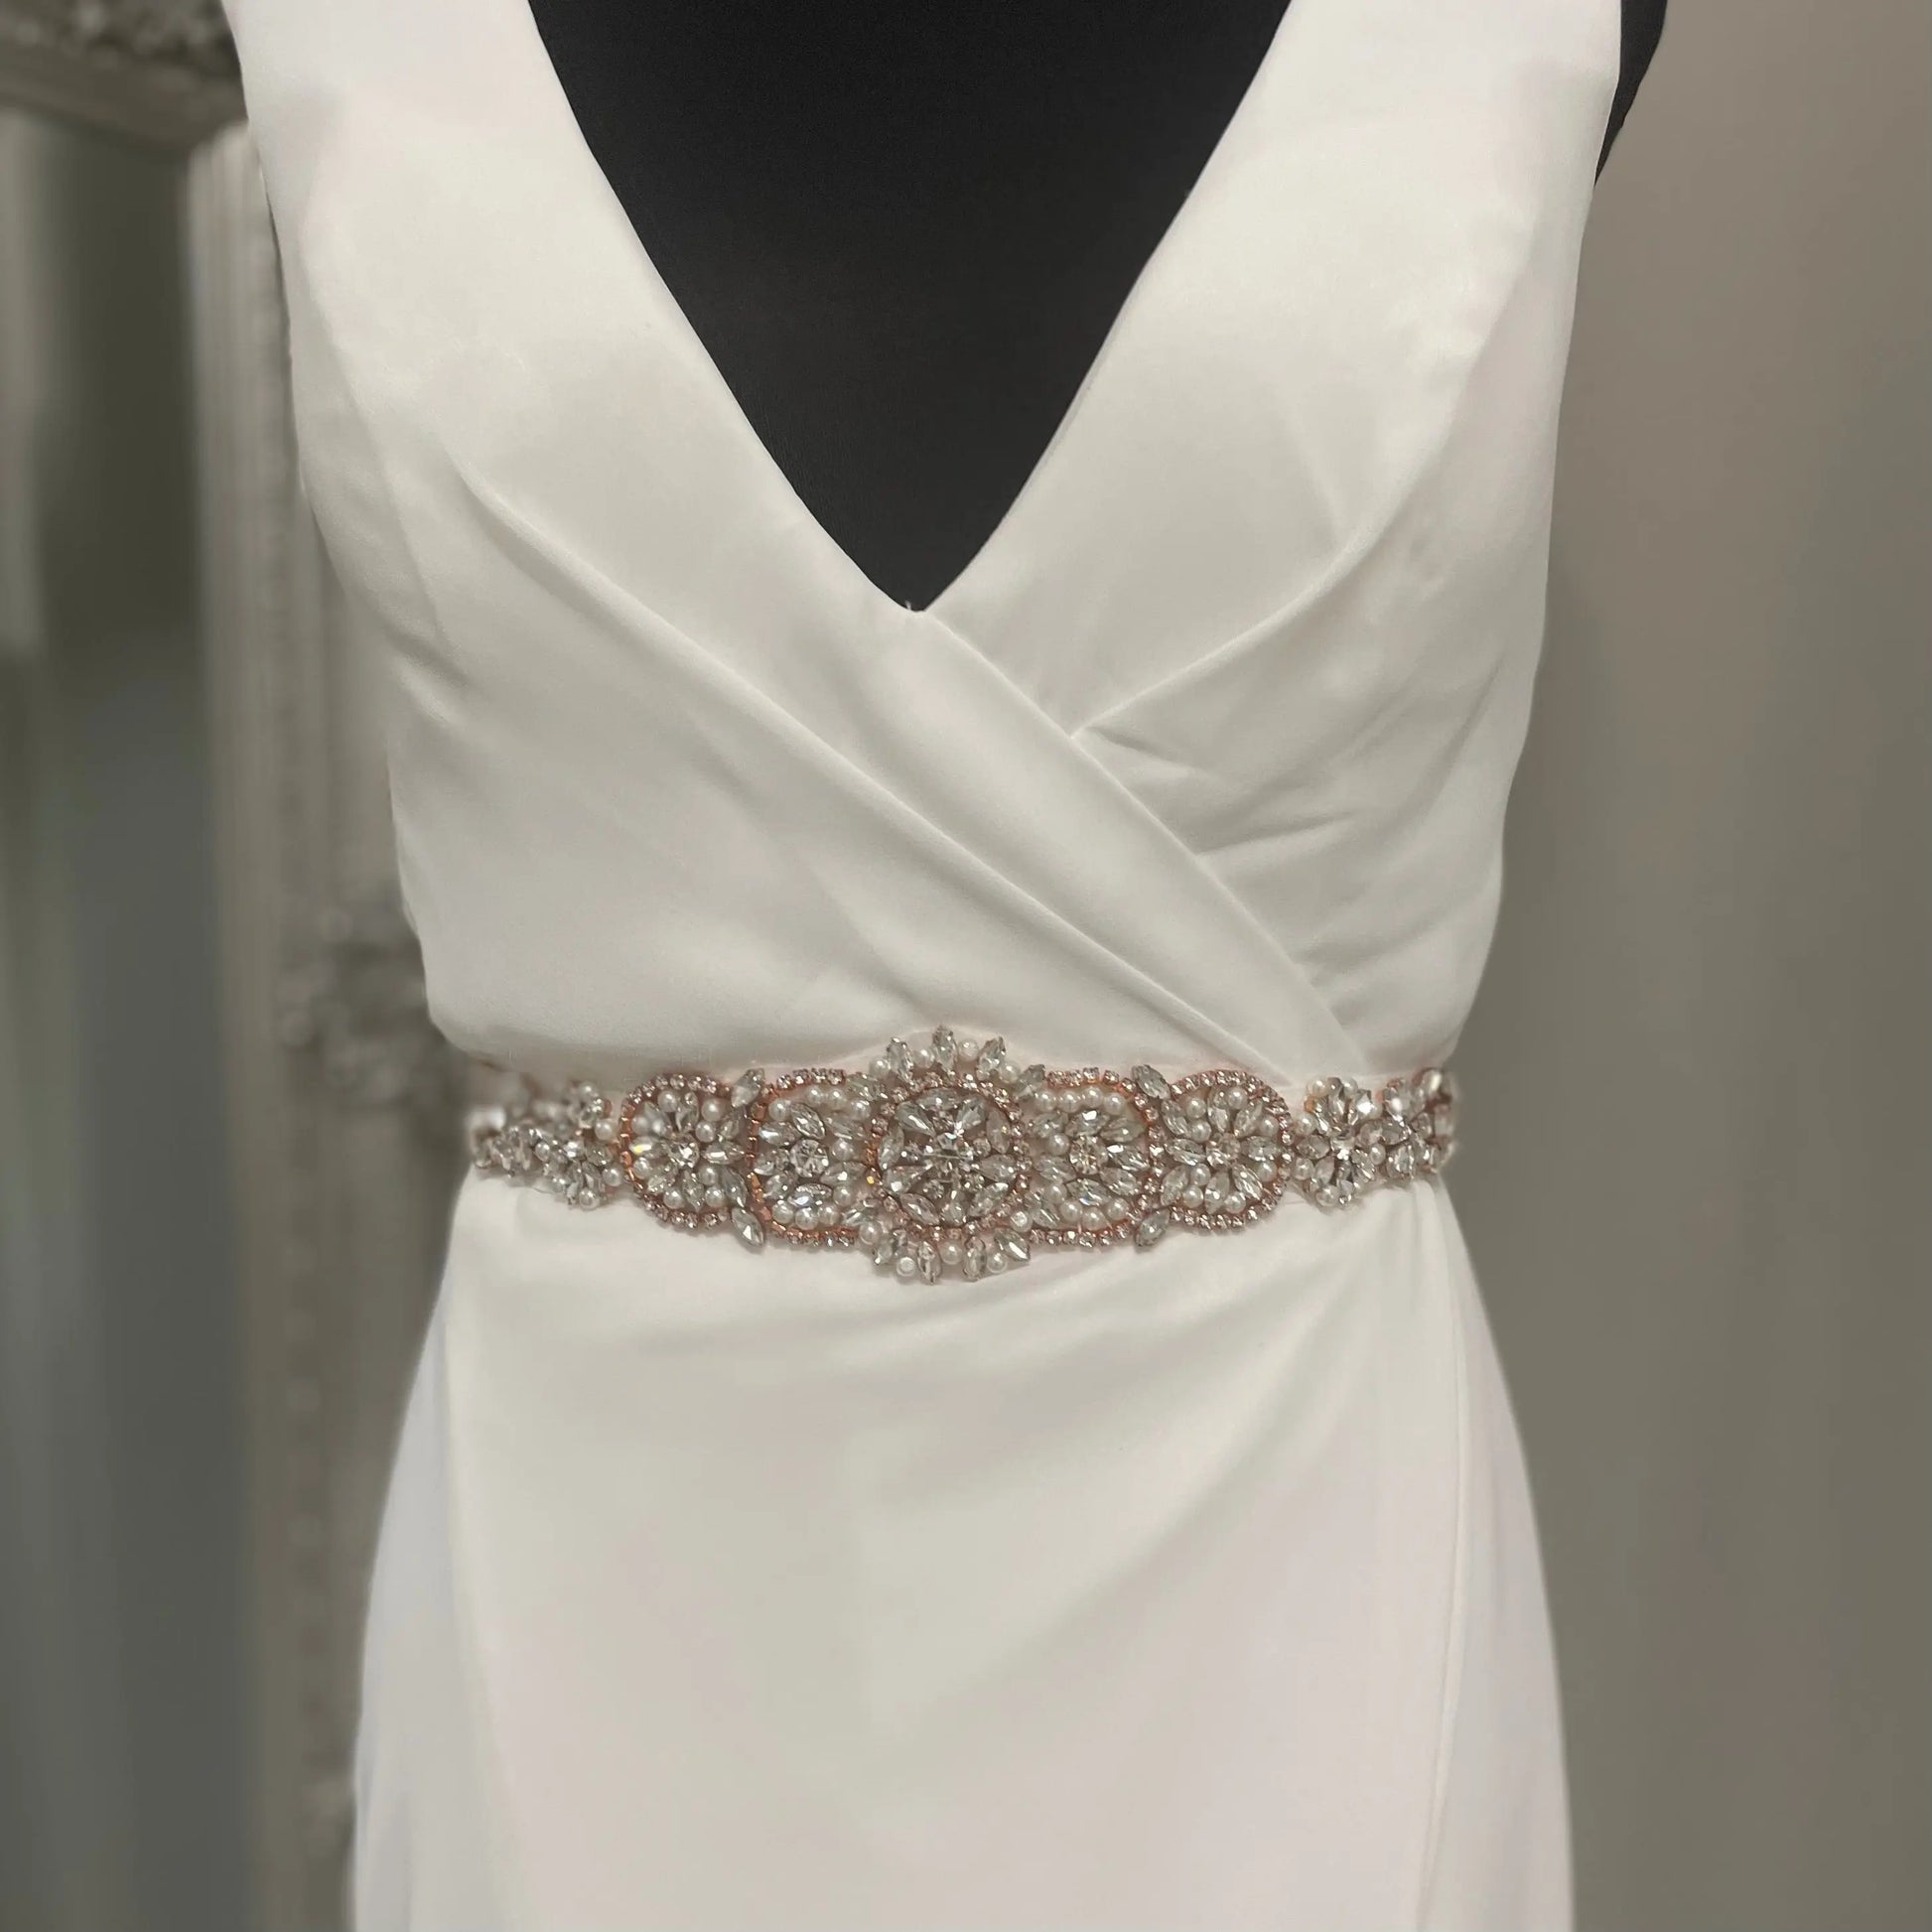 Close-up of the Zarah Bridal Belt, adorned with beautiful diamantés and pearls on a Rosegold backing, perfect for adding elegance to any wedding dress.